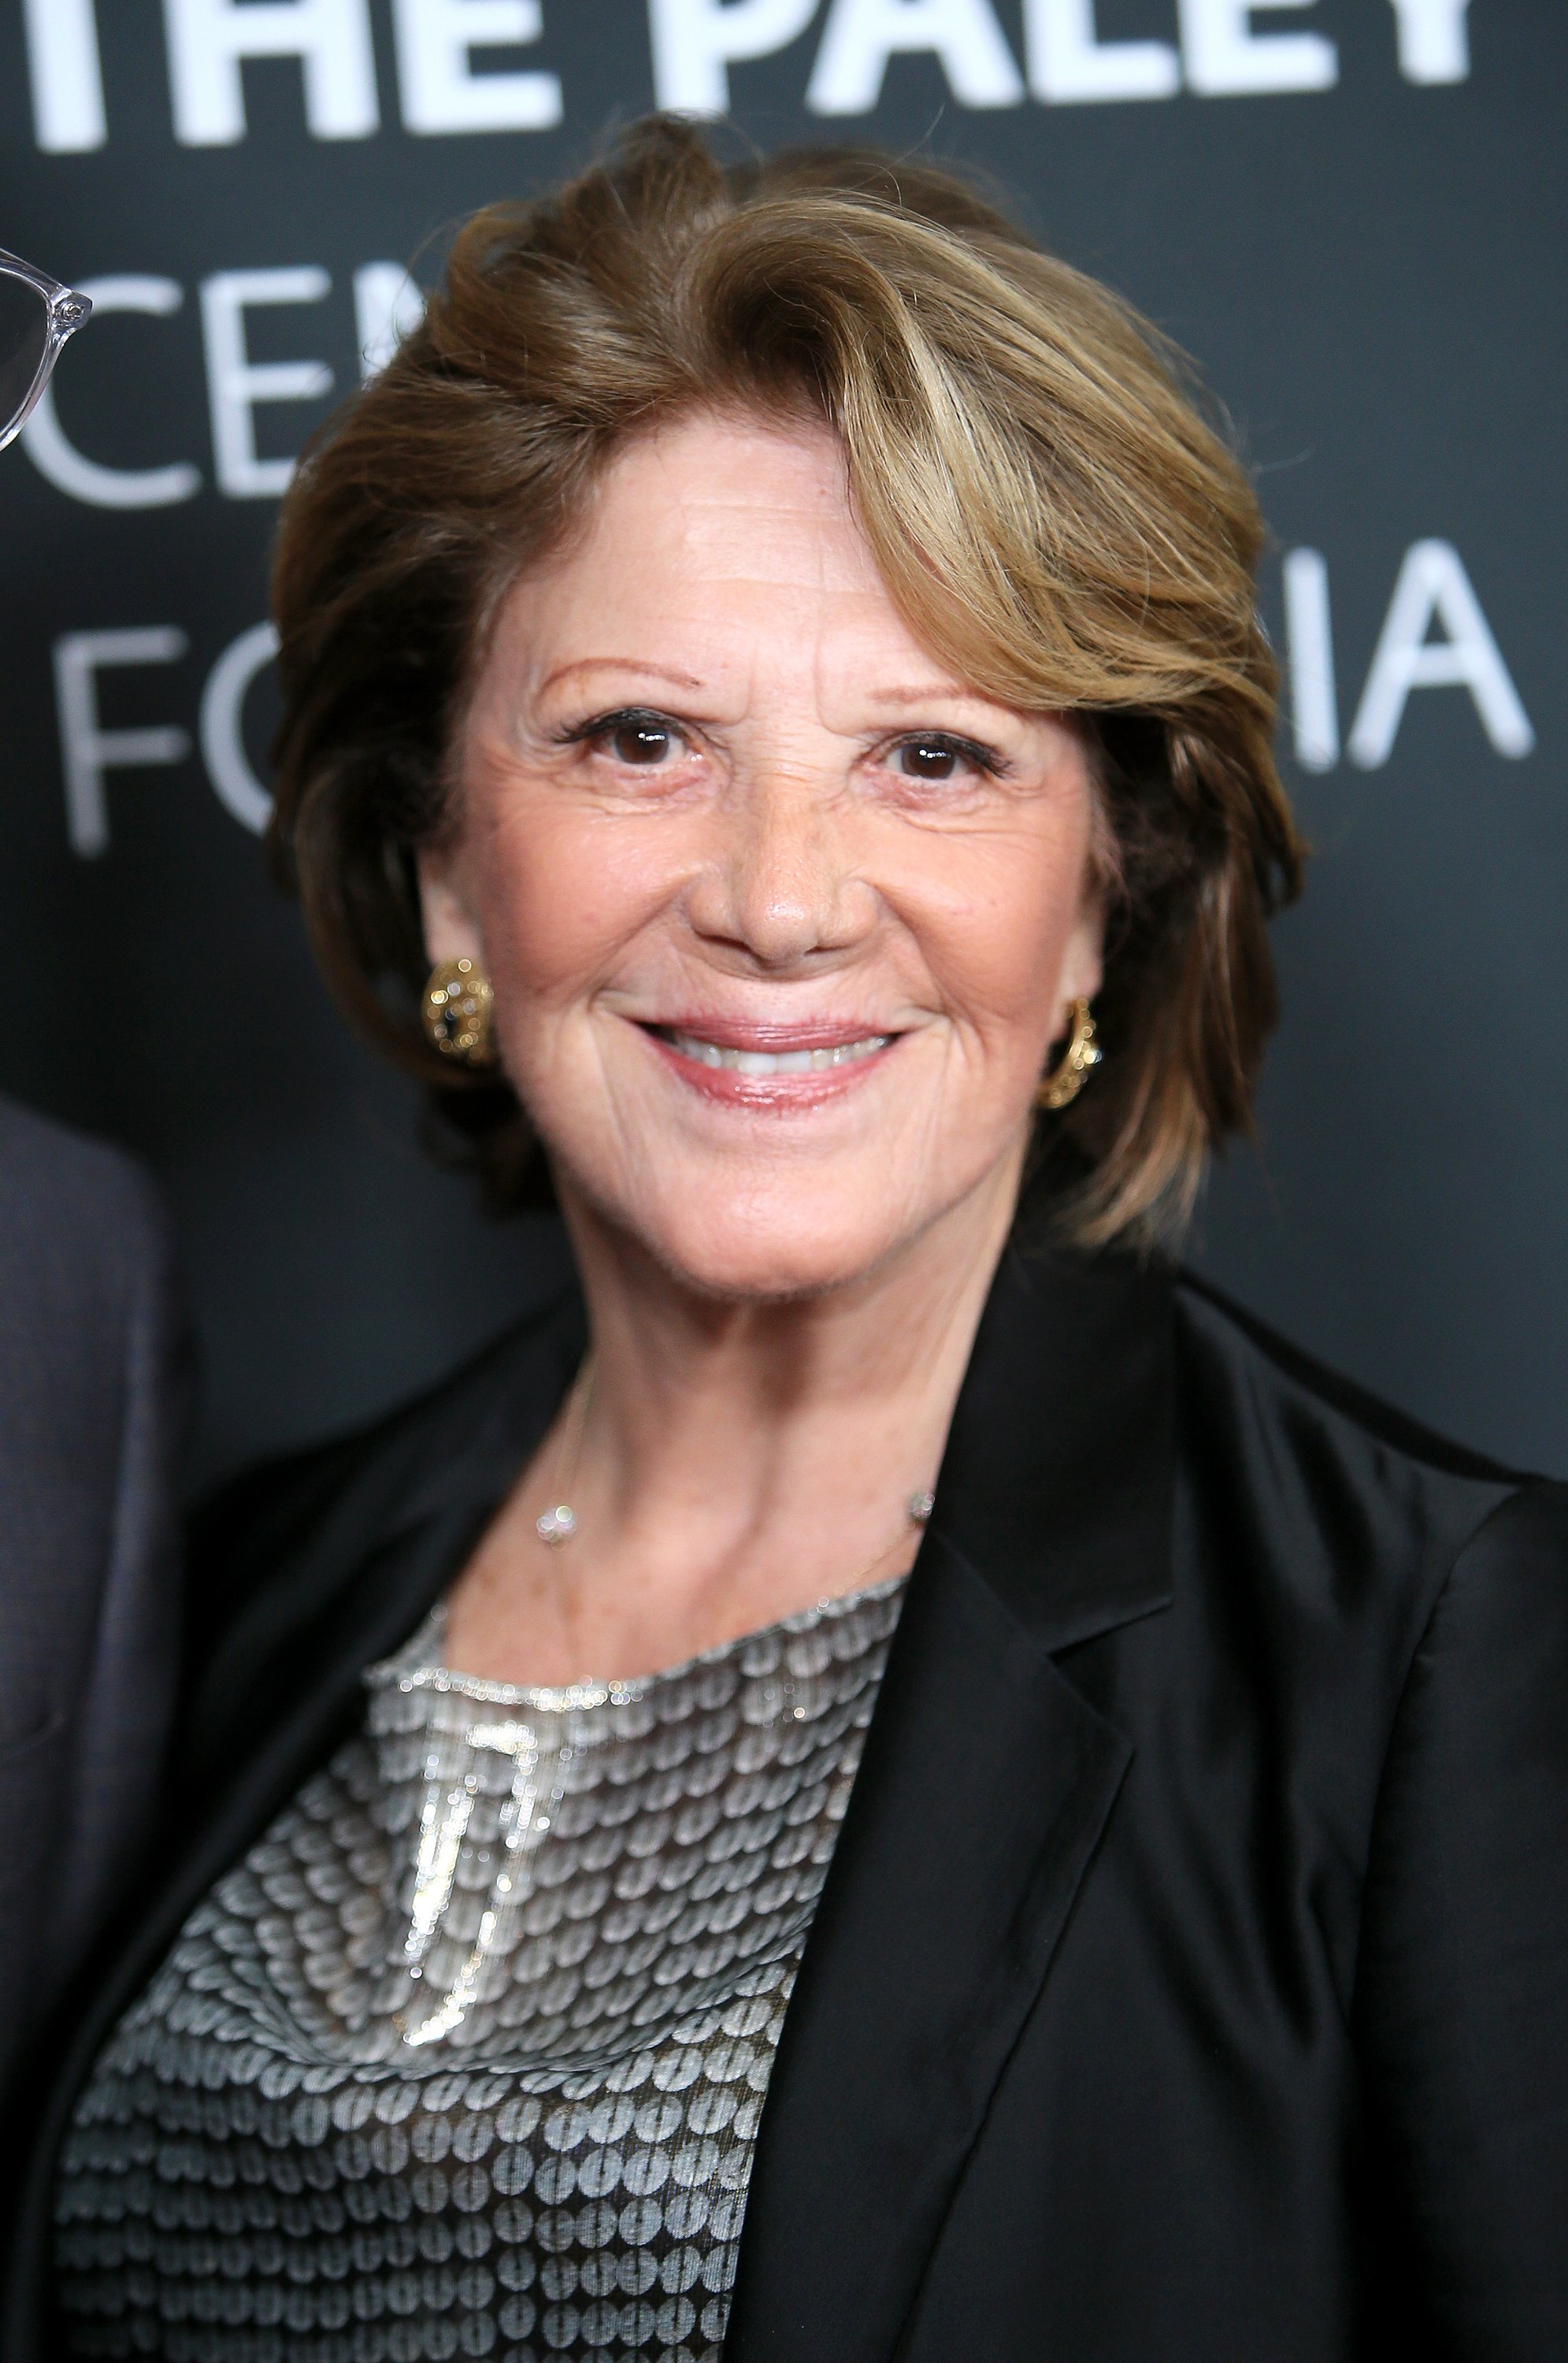 Linda Lavin attends Paley Honors in Hollywood: A Gala Celebrating Women in Television at the Beverly Wilshire Four Seasons Hotel on October 12, 2017 in Beverly Hills, California. | Source: Getty Images